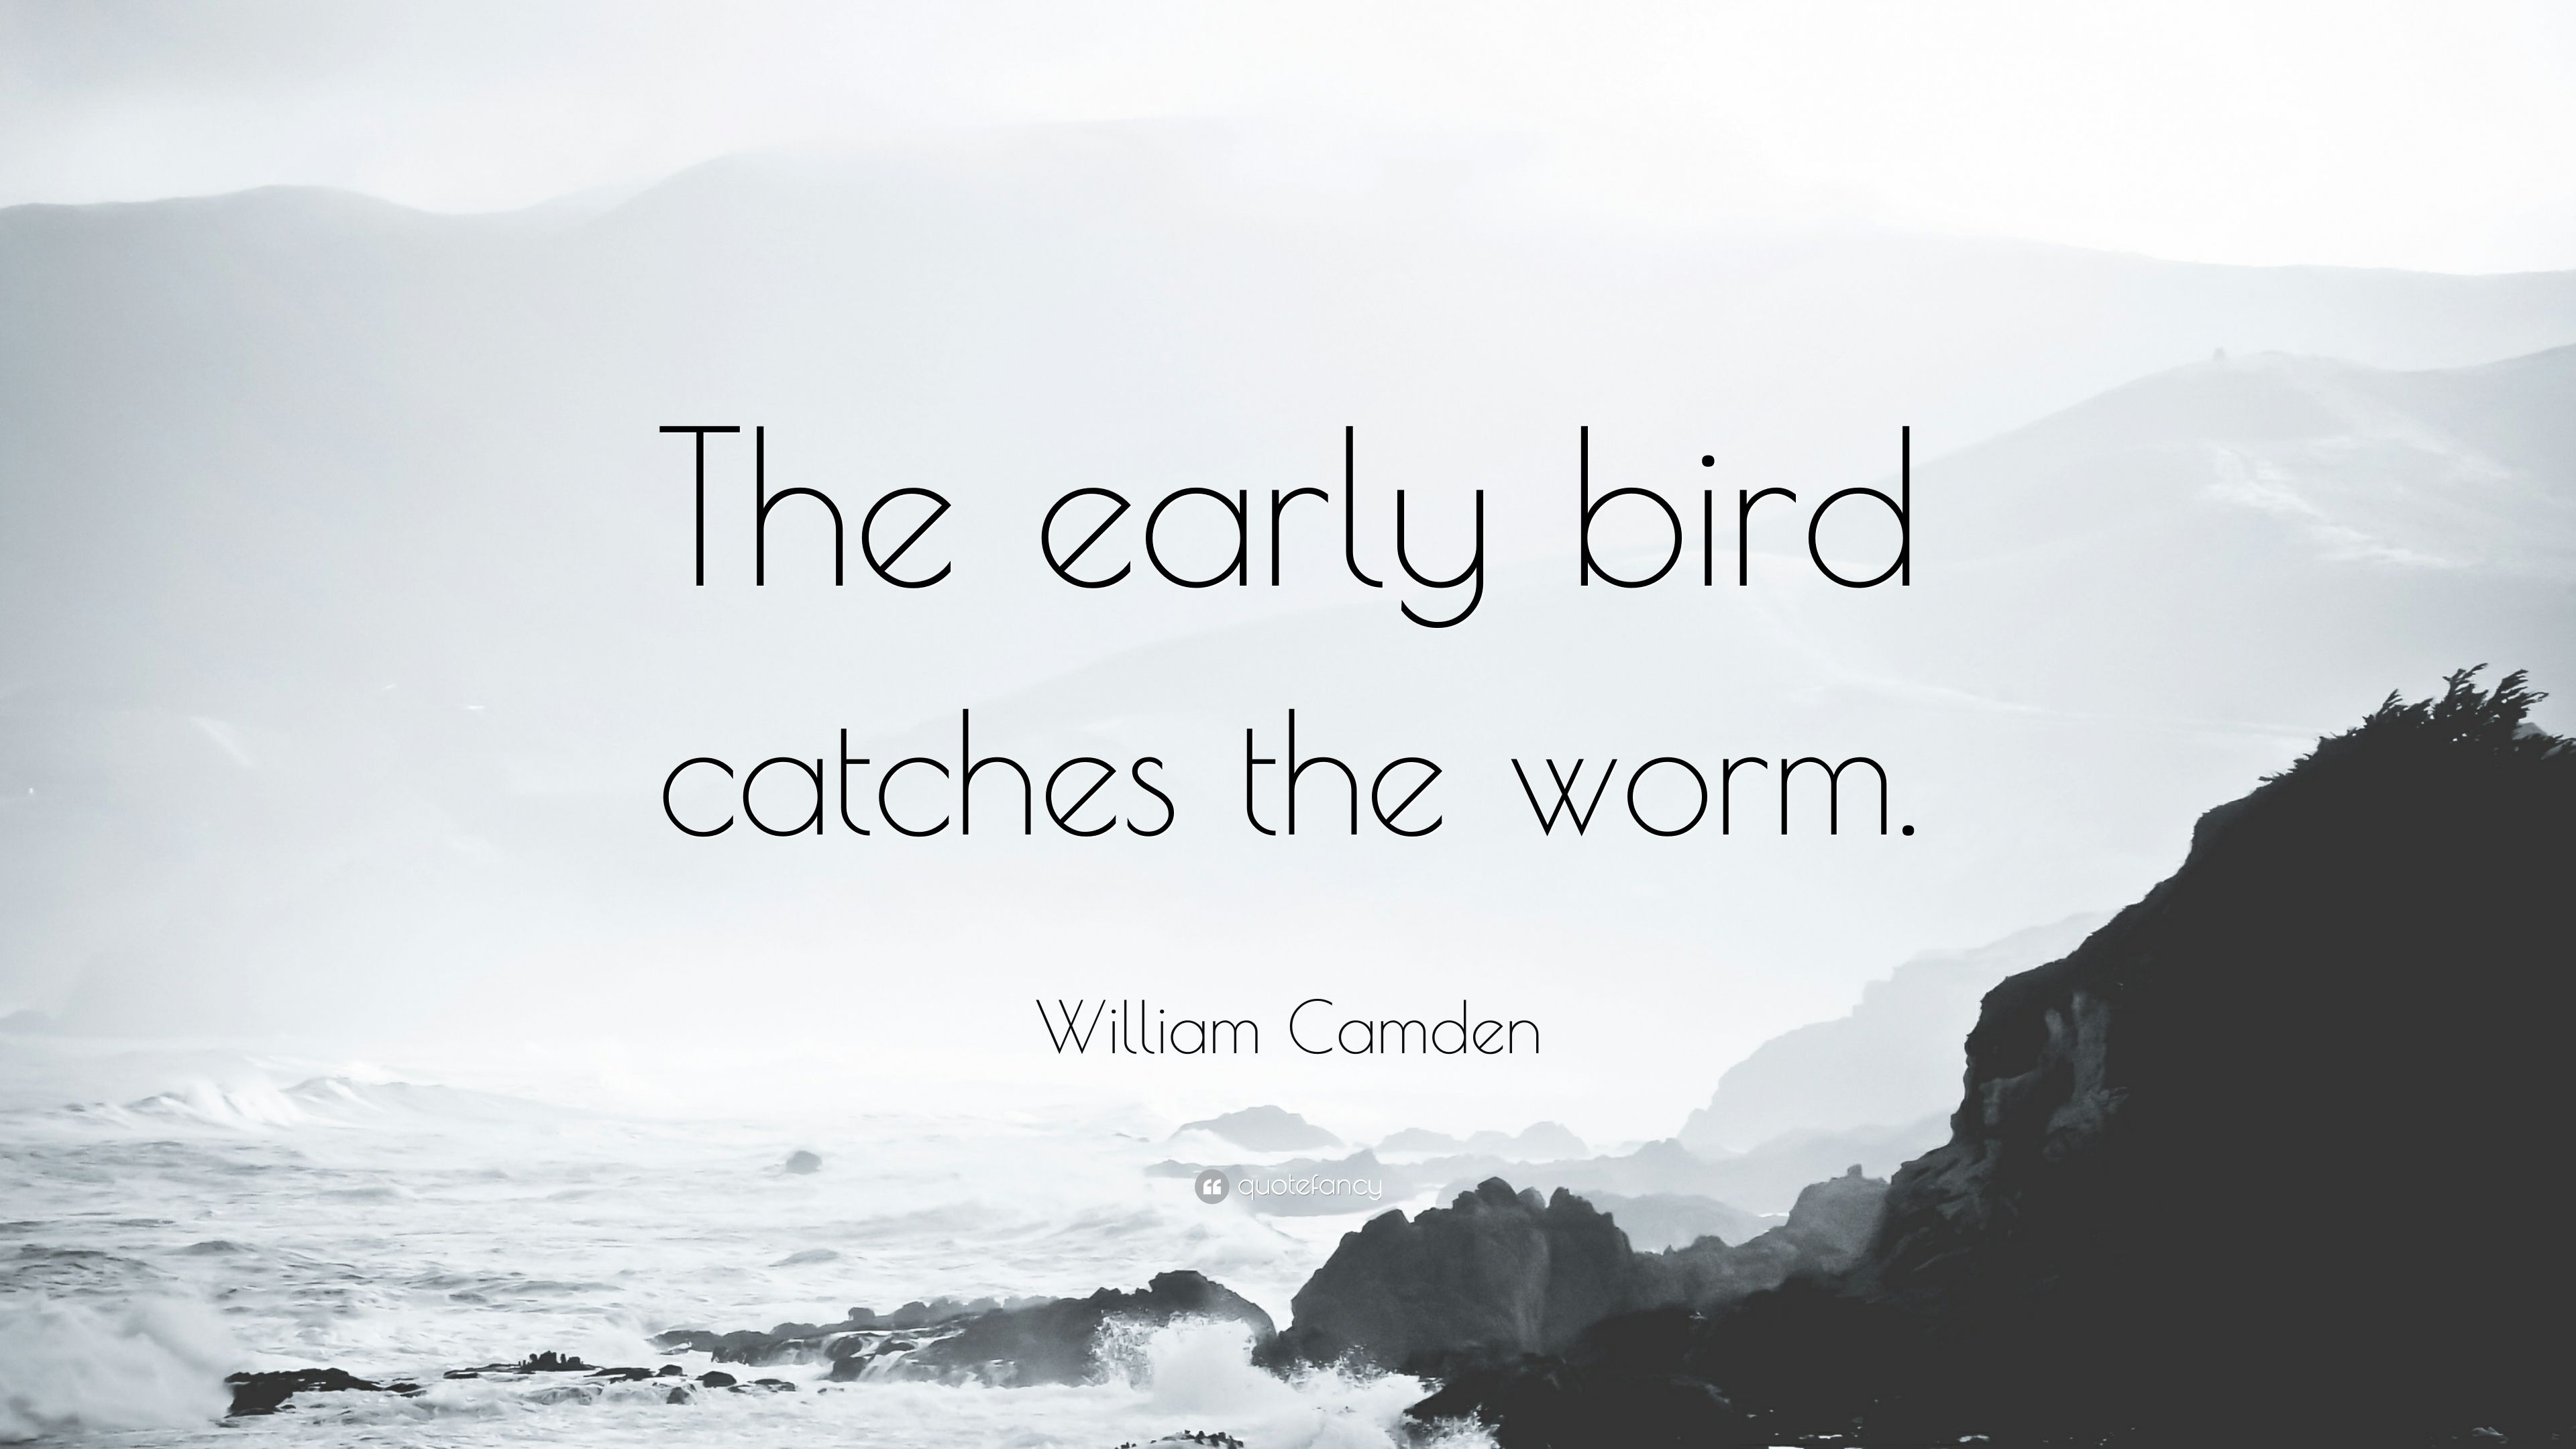 William Camden Quote: “The early bird catches the worm.” 9